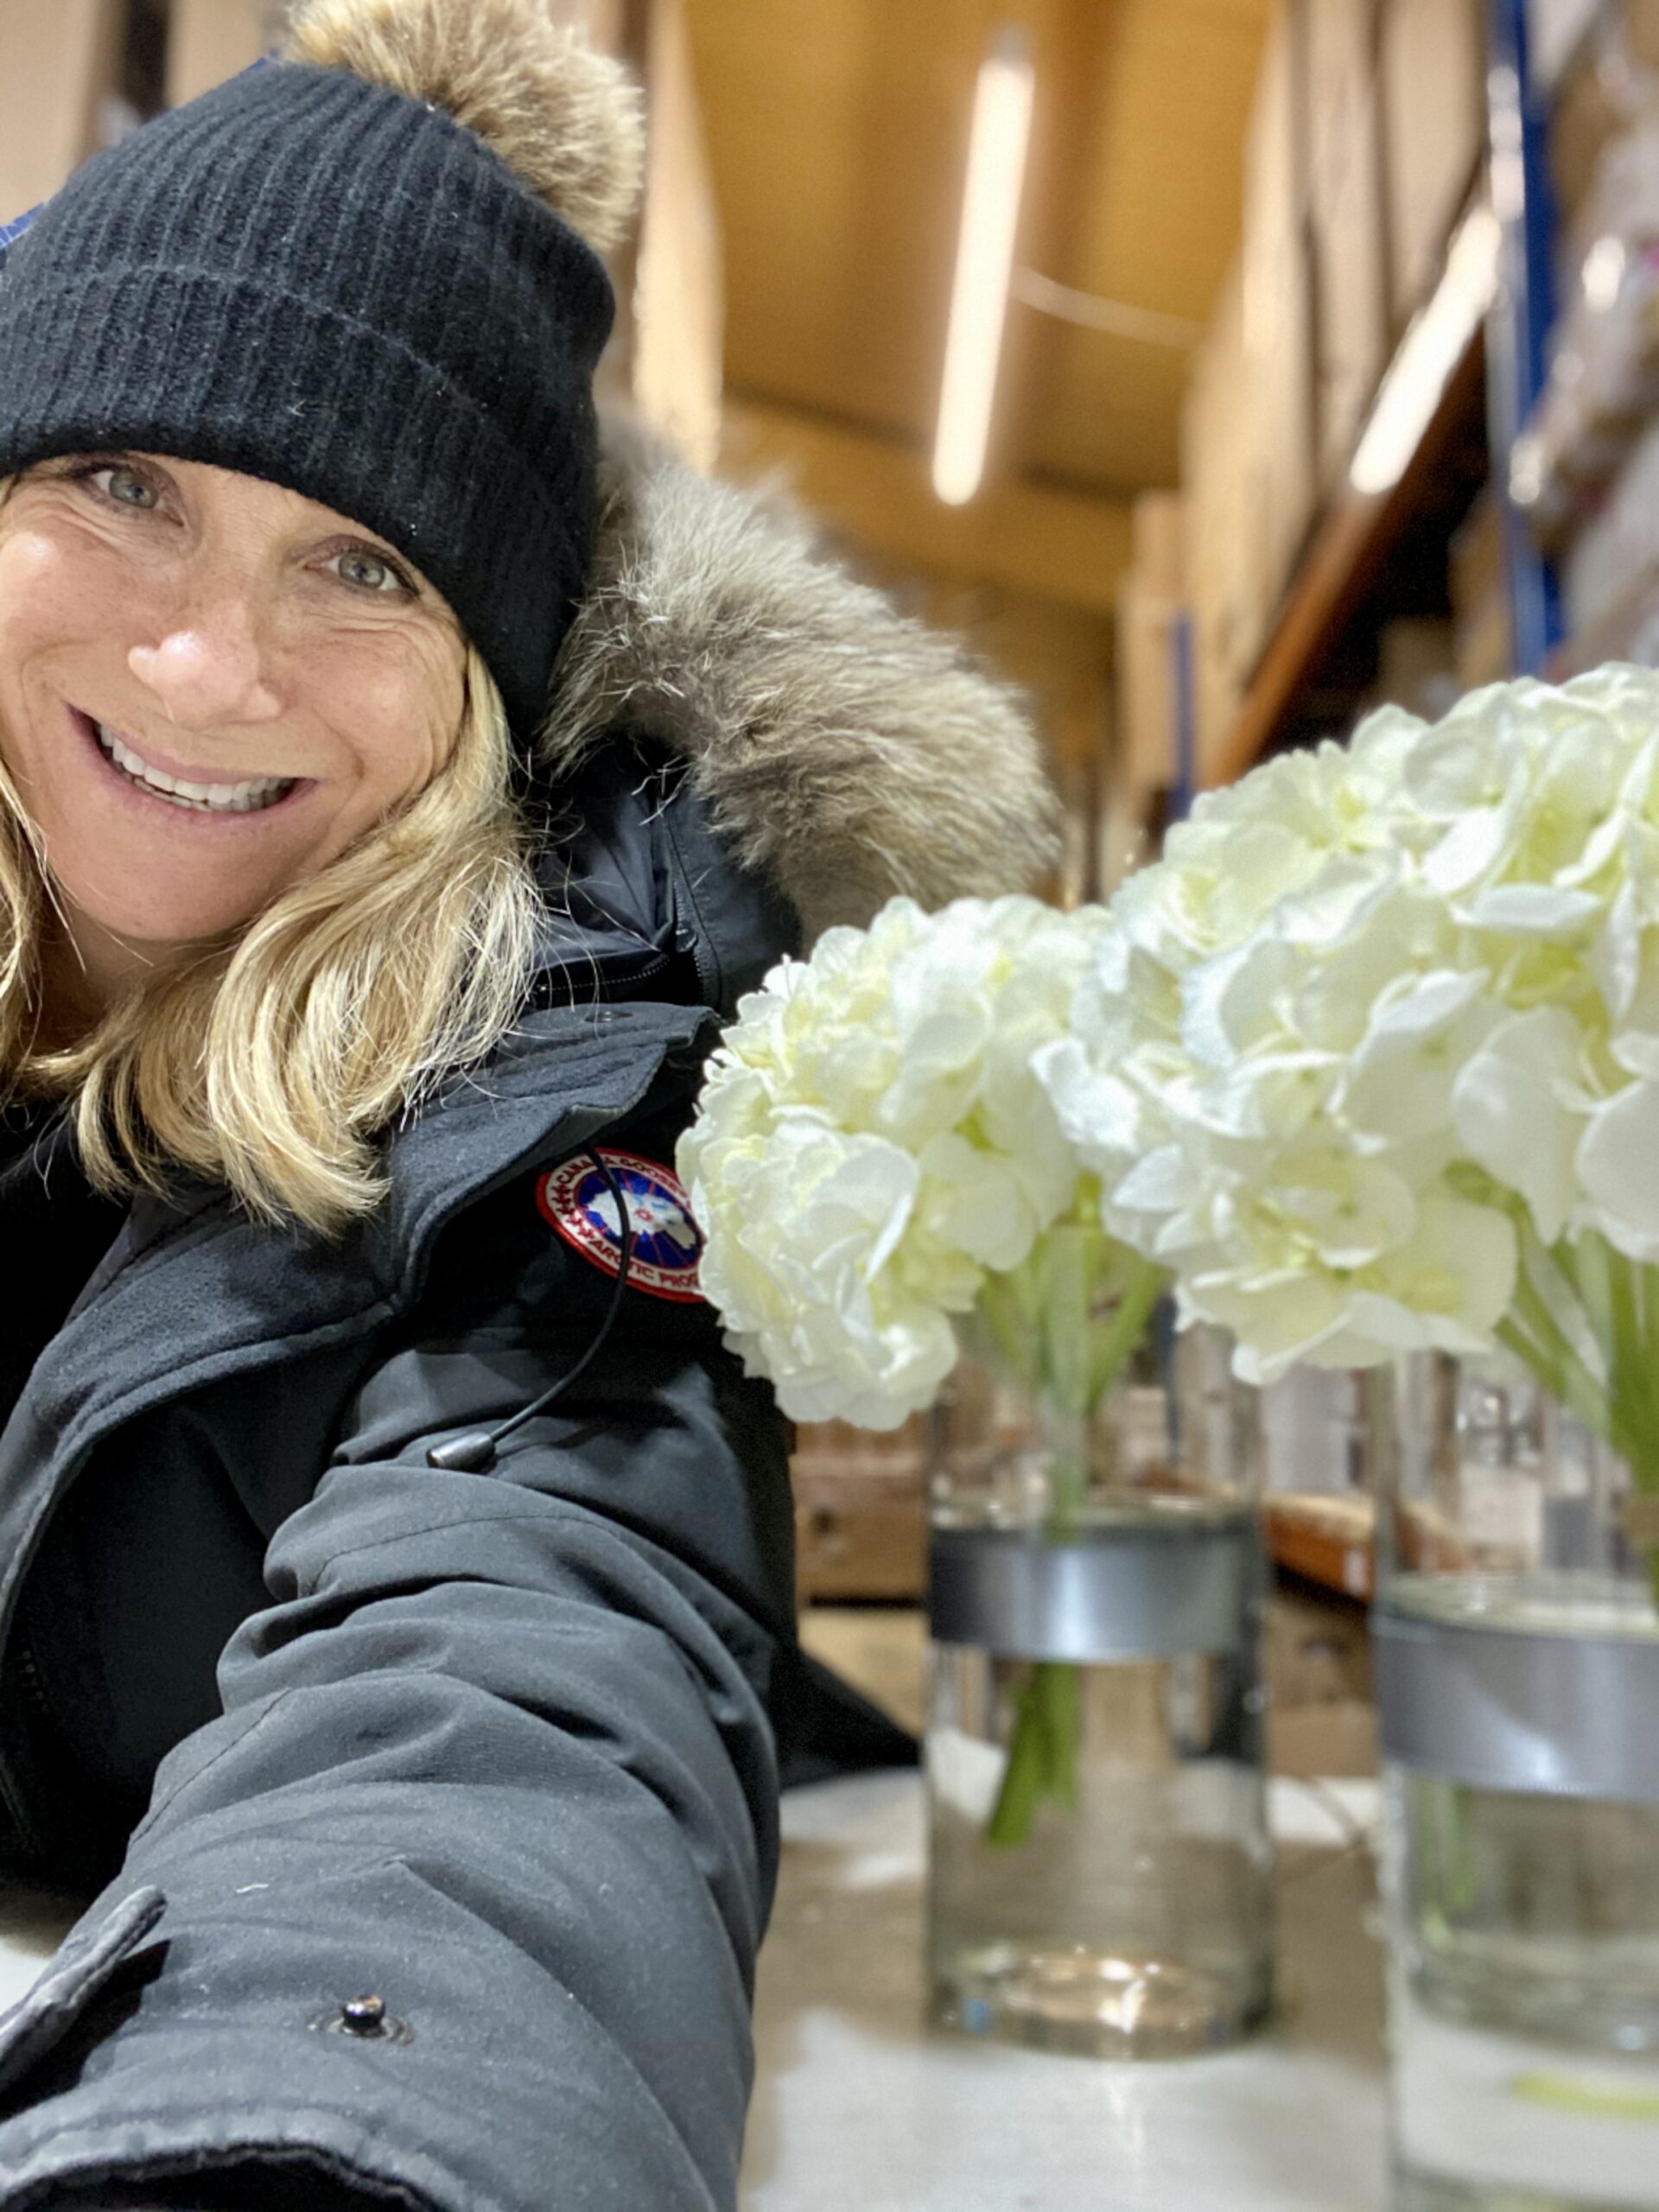 blonde woman smiling next to a pot of flowers. she is wearing a black hat.